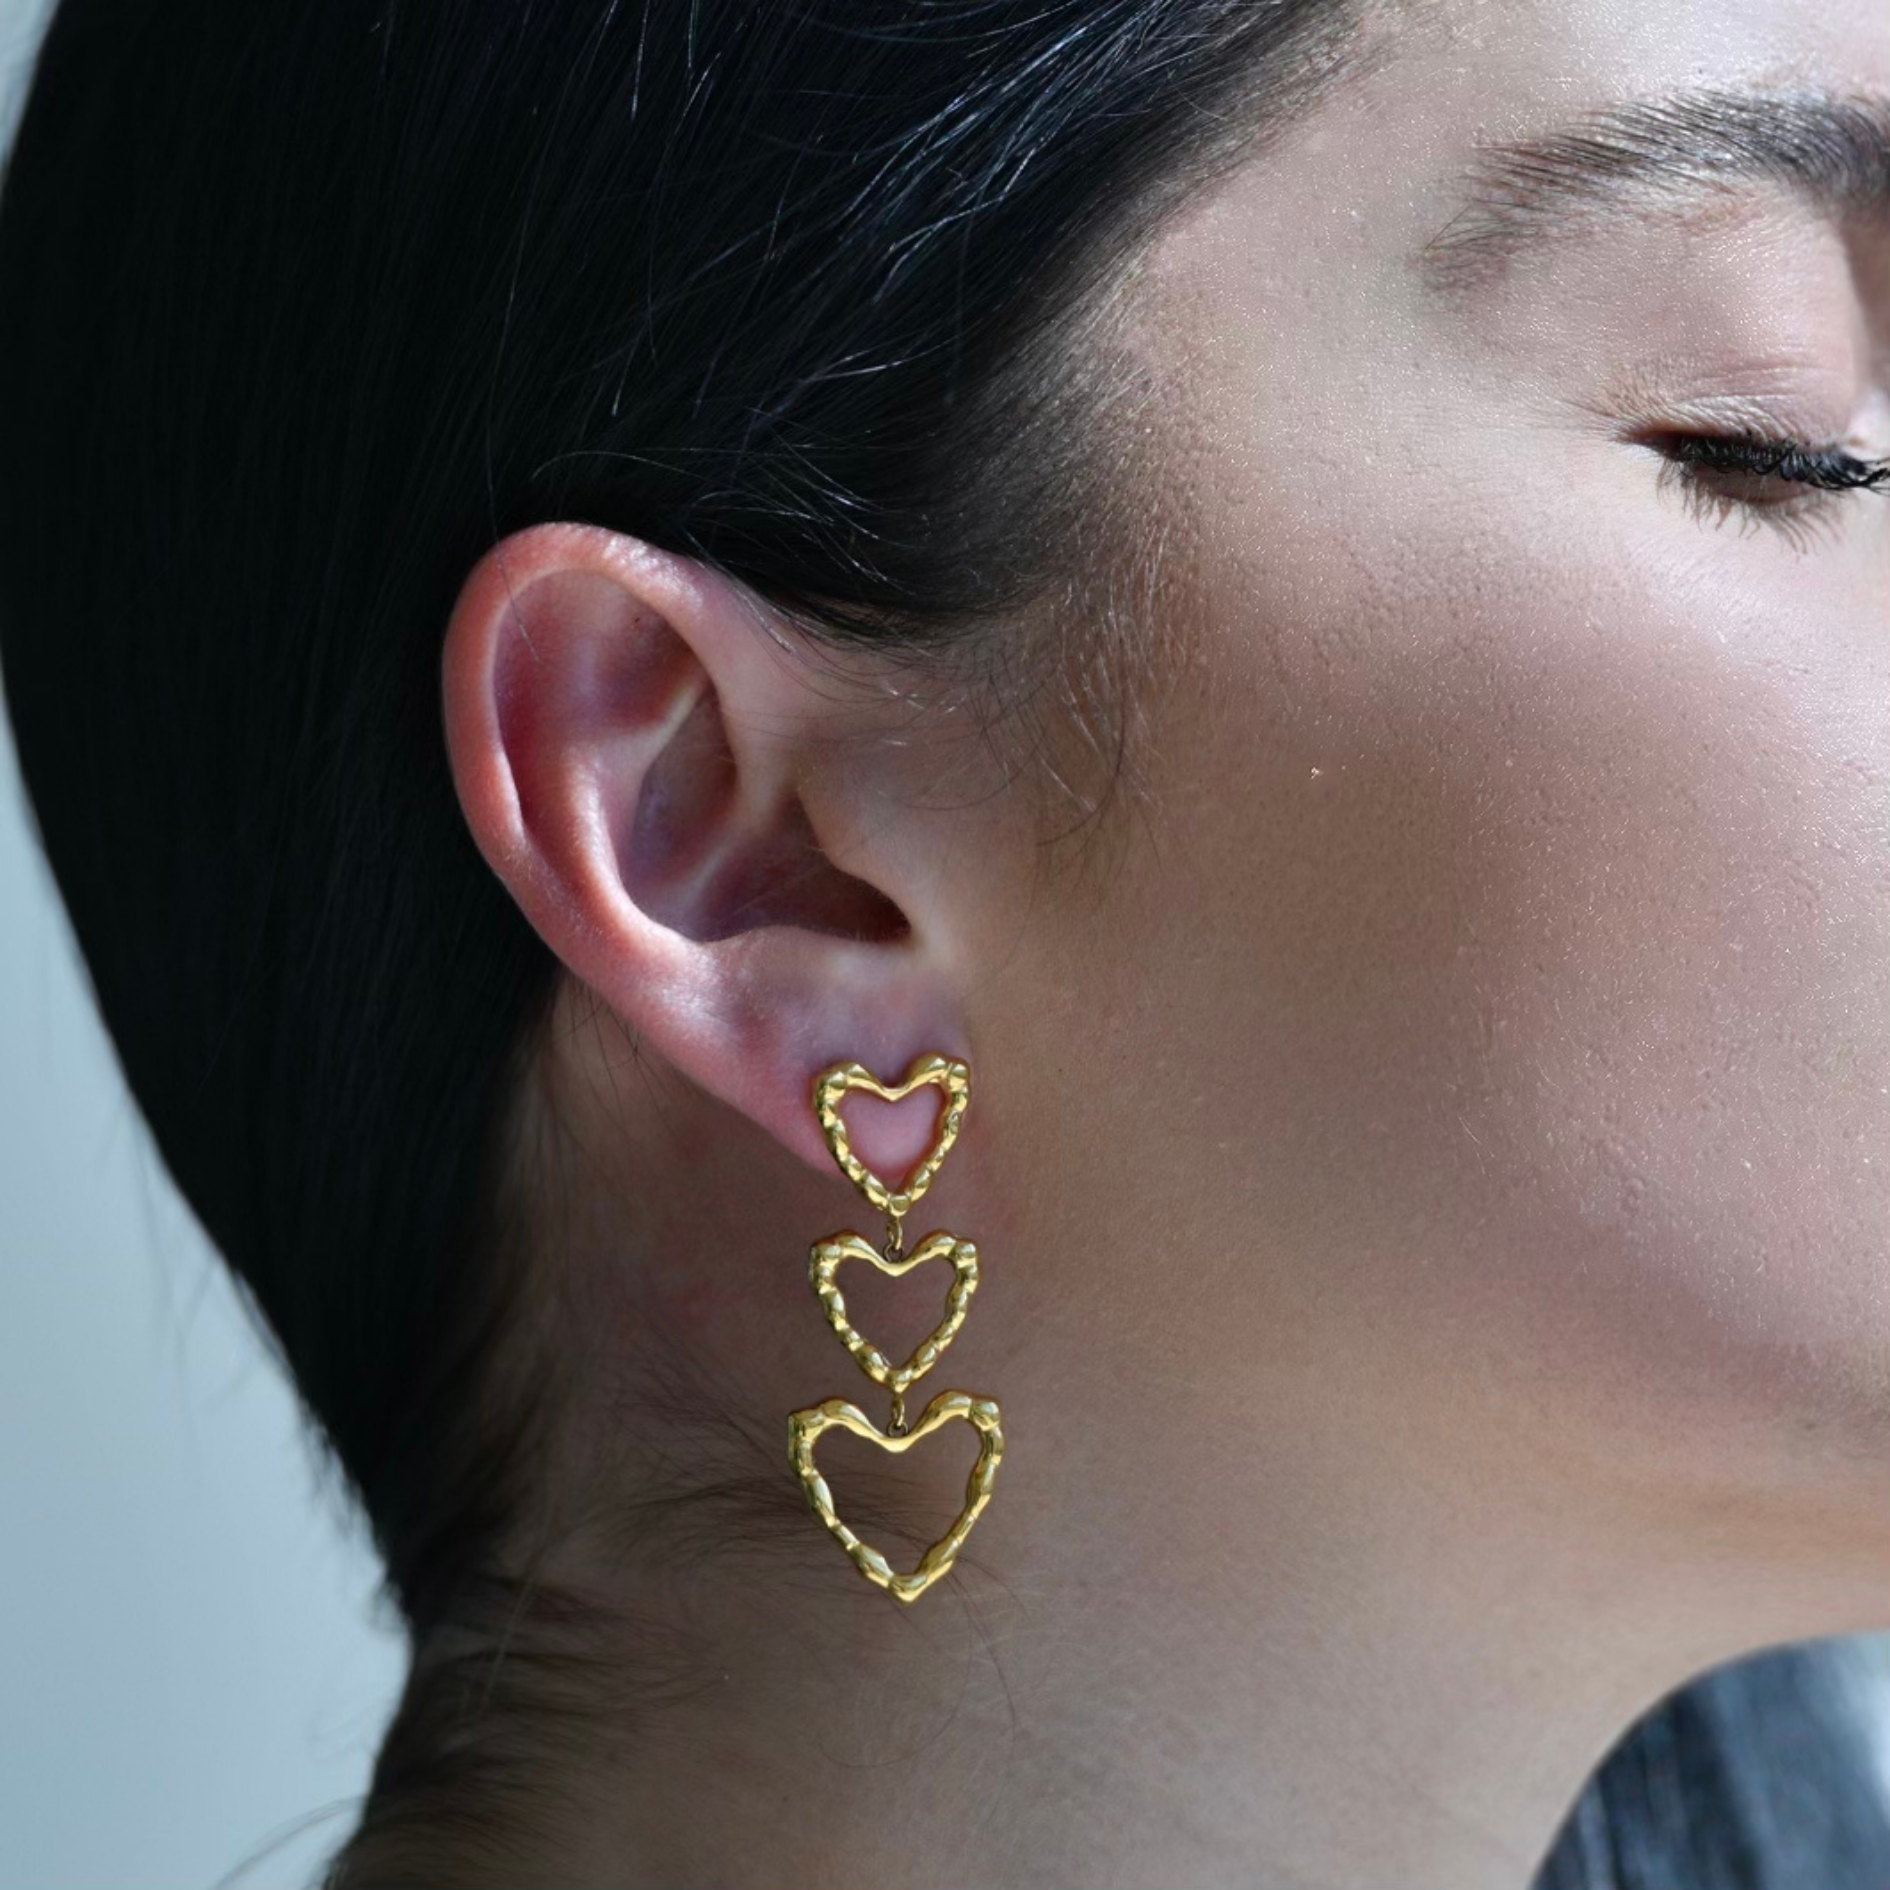 three heart shapes hanging one after the other. The biggest heart hangs at the end of the earrings. The surface is inspired by sand dunes. The hearts are empty on their surface, only the outer frames have metal.